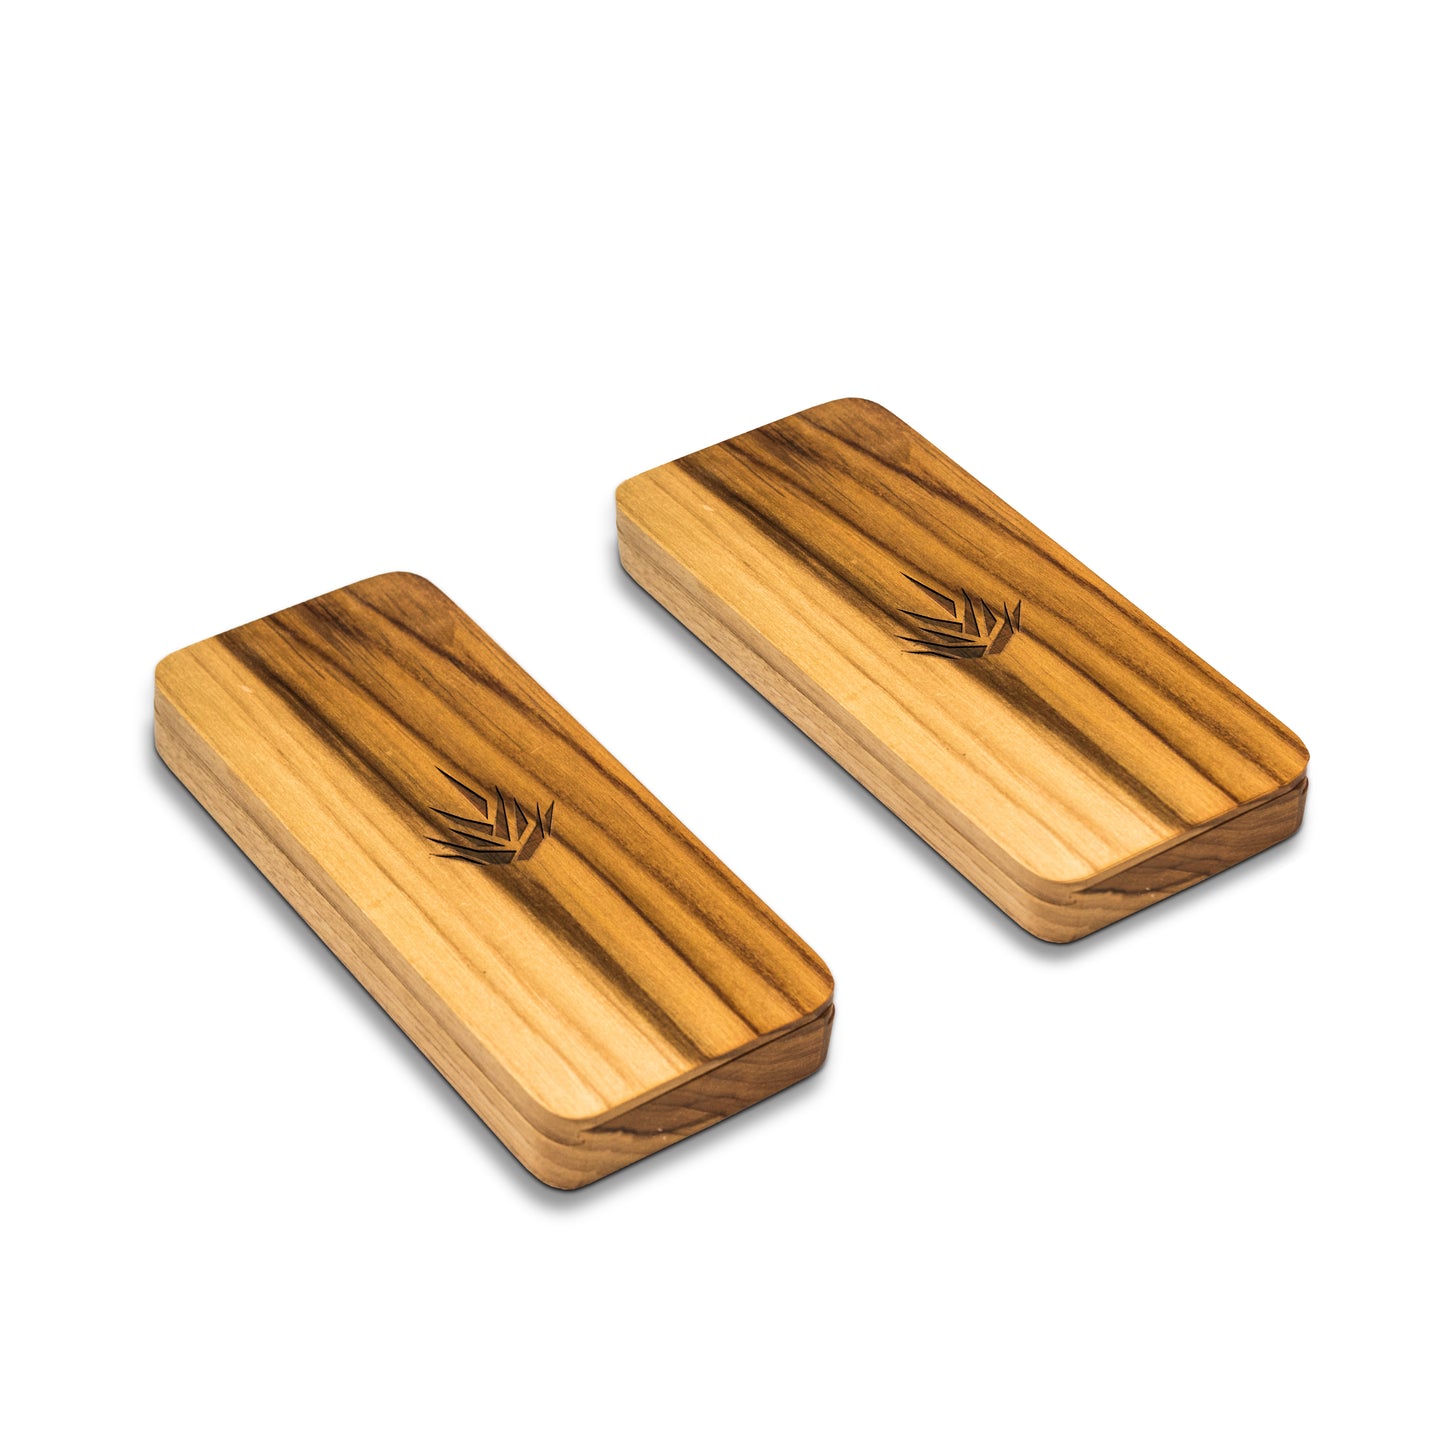 Pair of Agavus Special Edition Teak 37mm and 44mm - Leather 